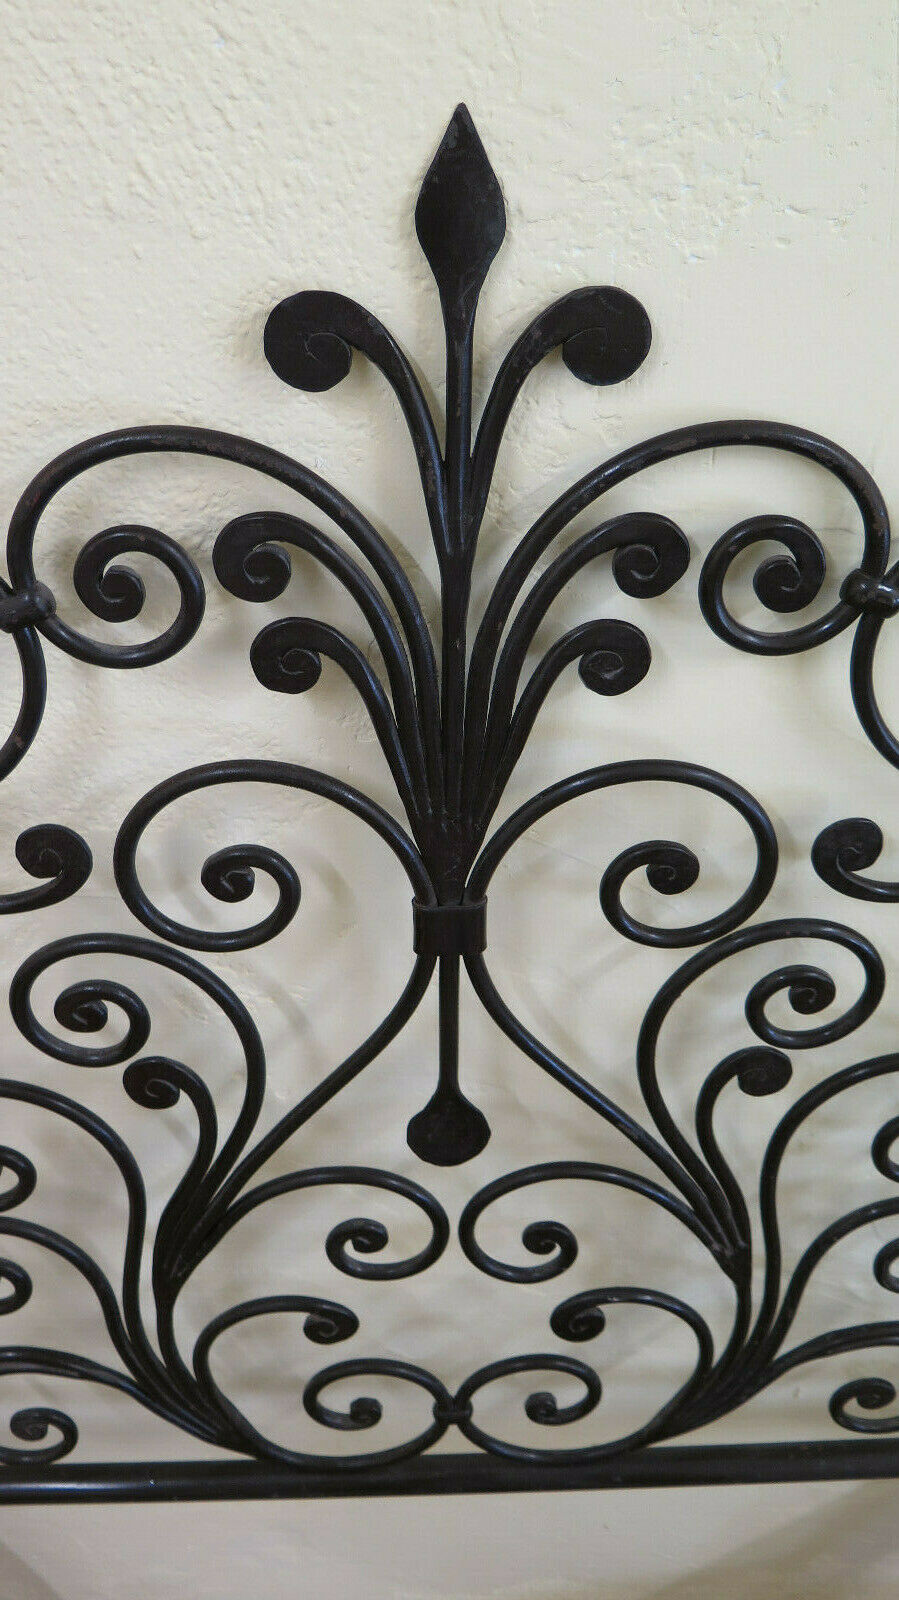 BED HEADBOARD 128 cm IN WROUGHT IRON PEACOCK TAIL HEADBOARD VINTAGE 19 